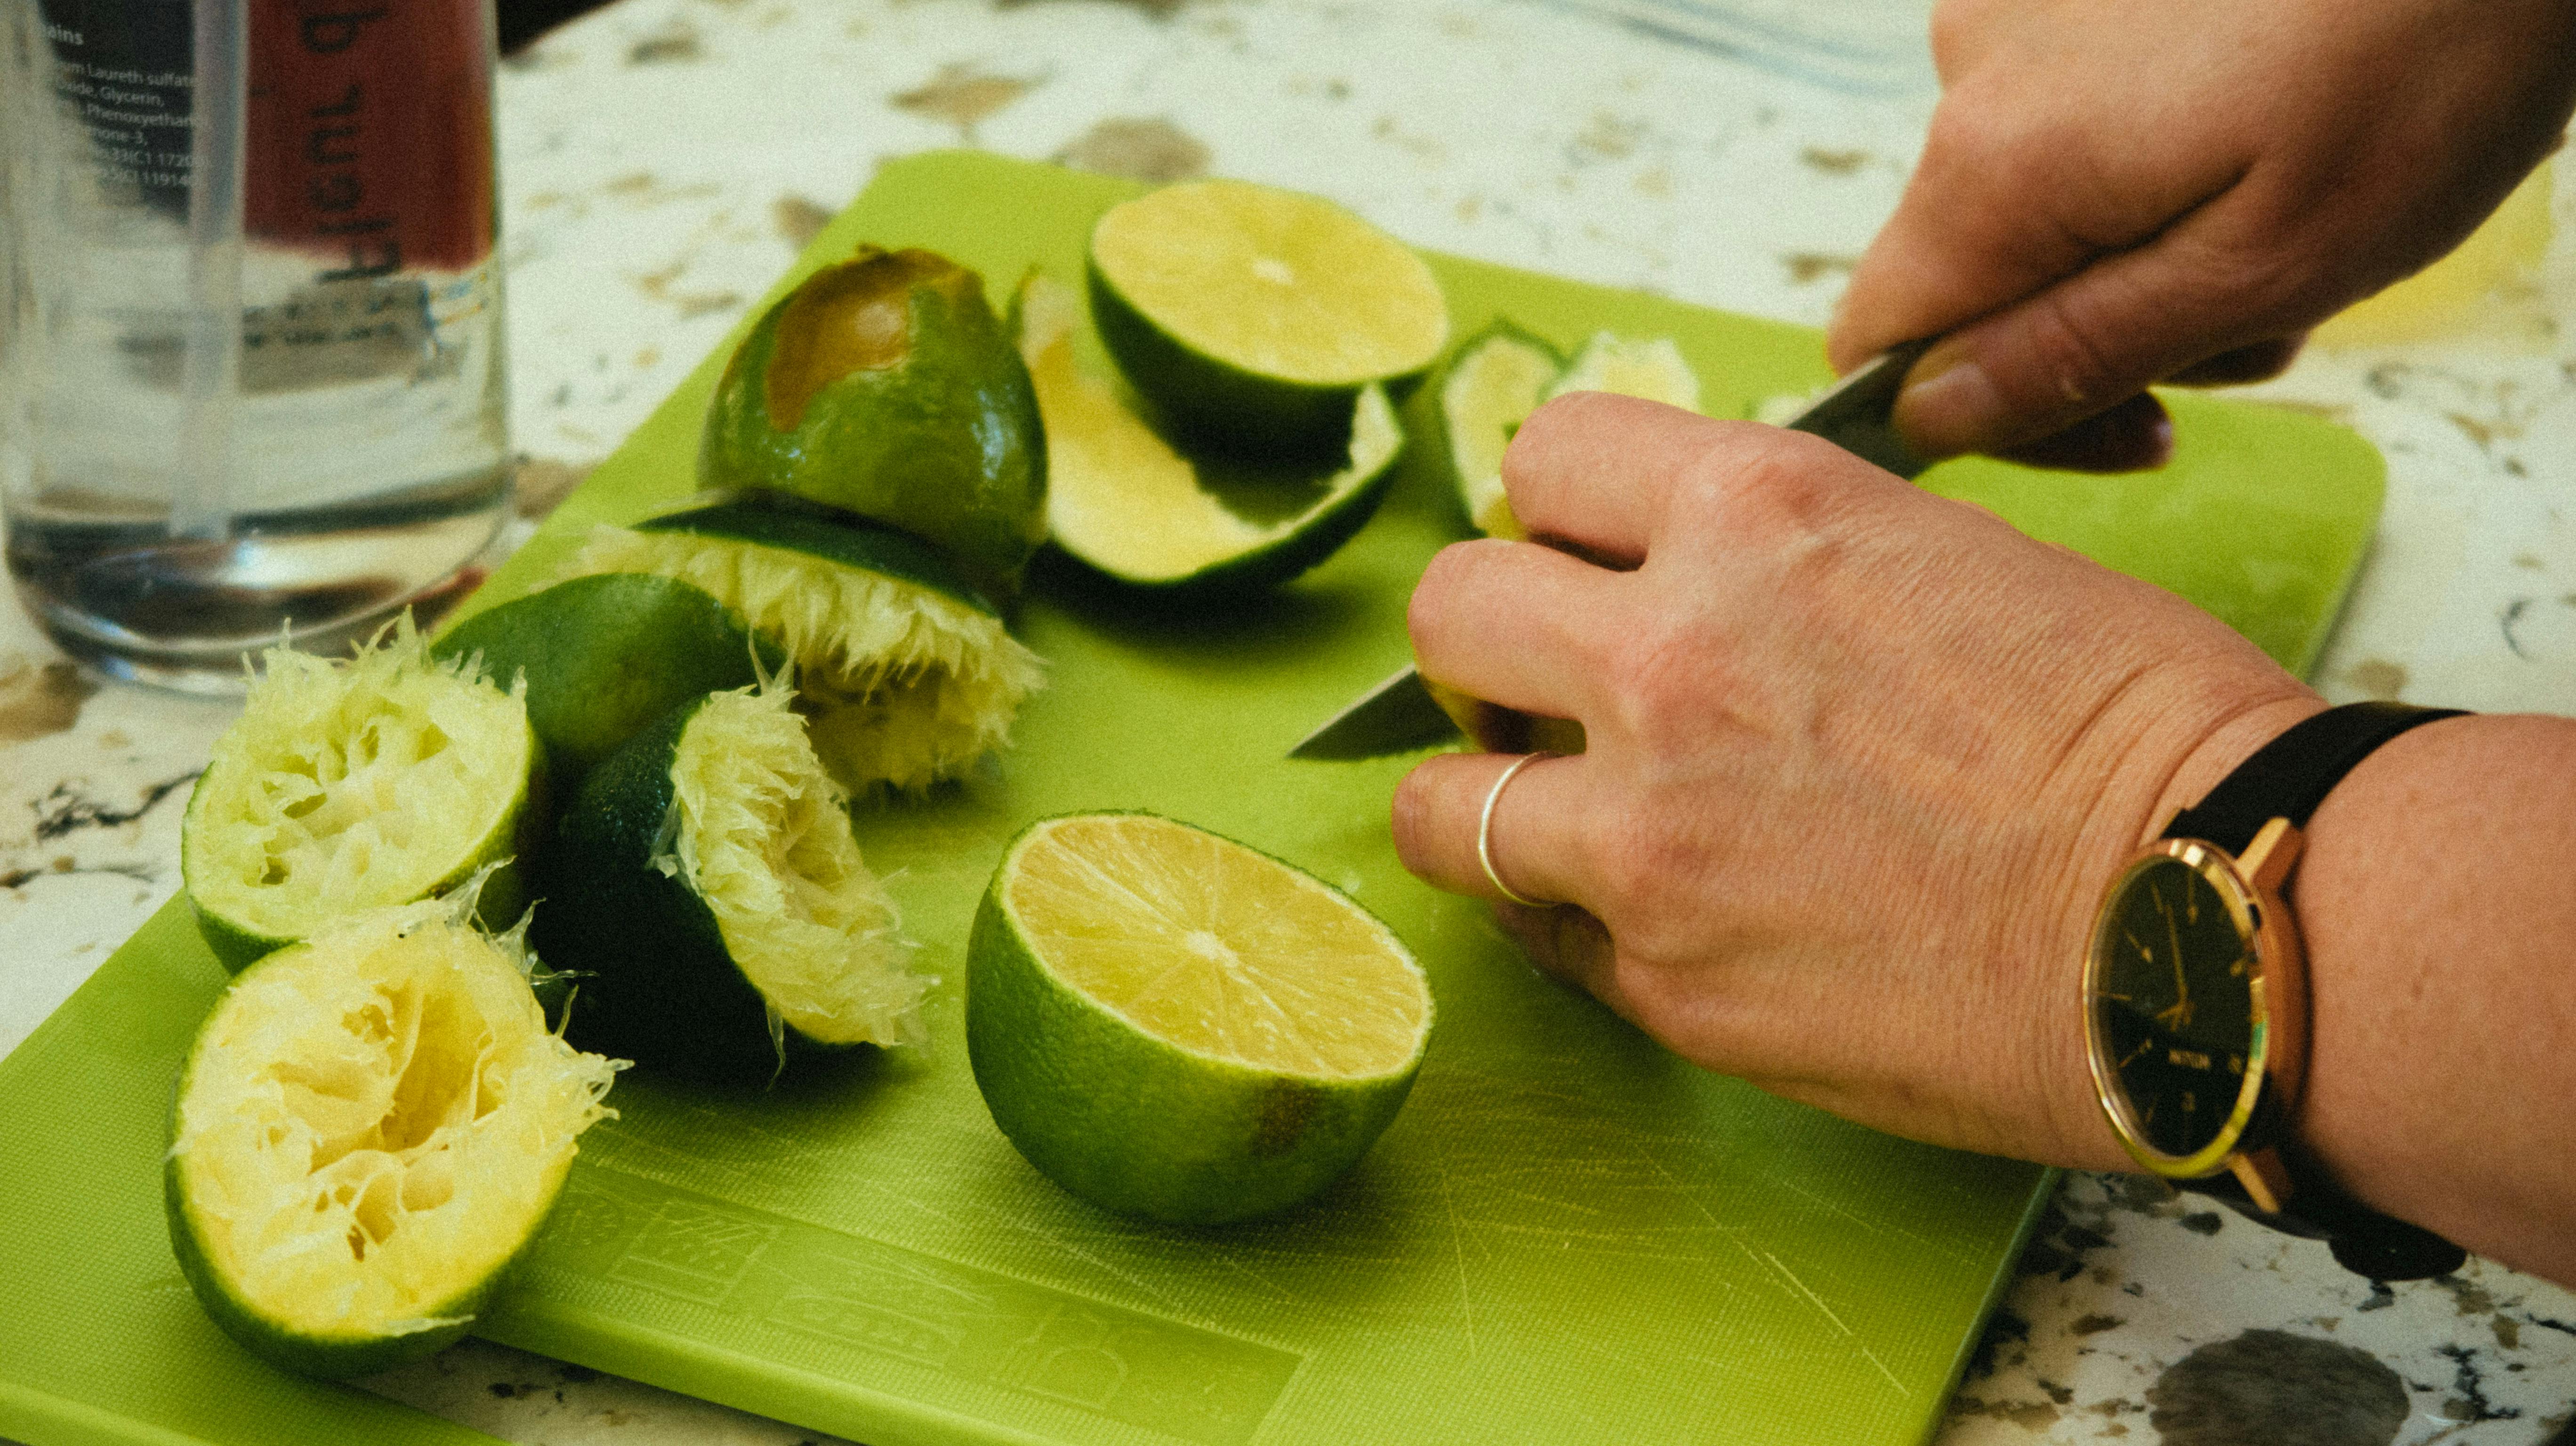 sliced limes on green chopping board